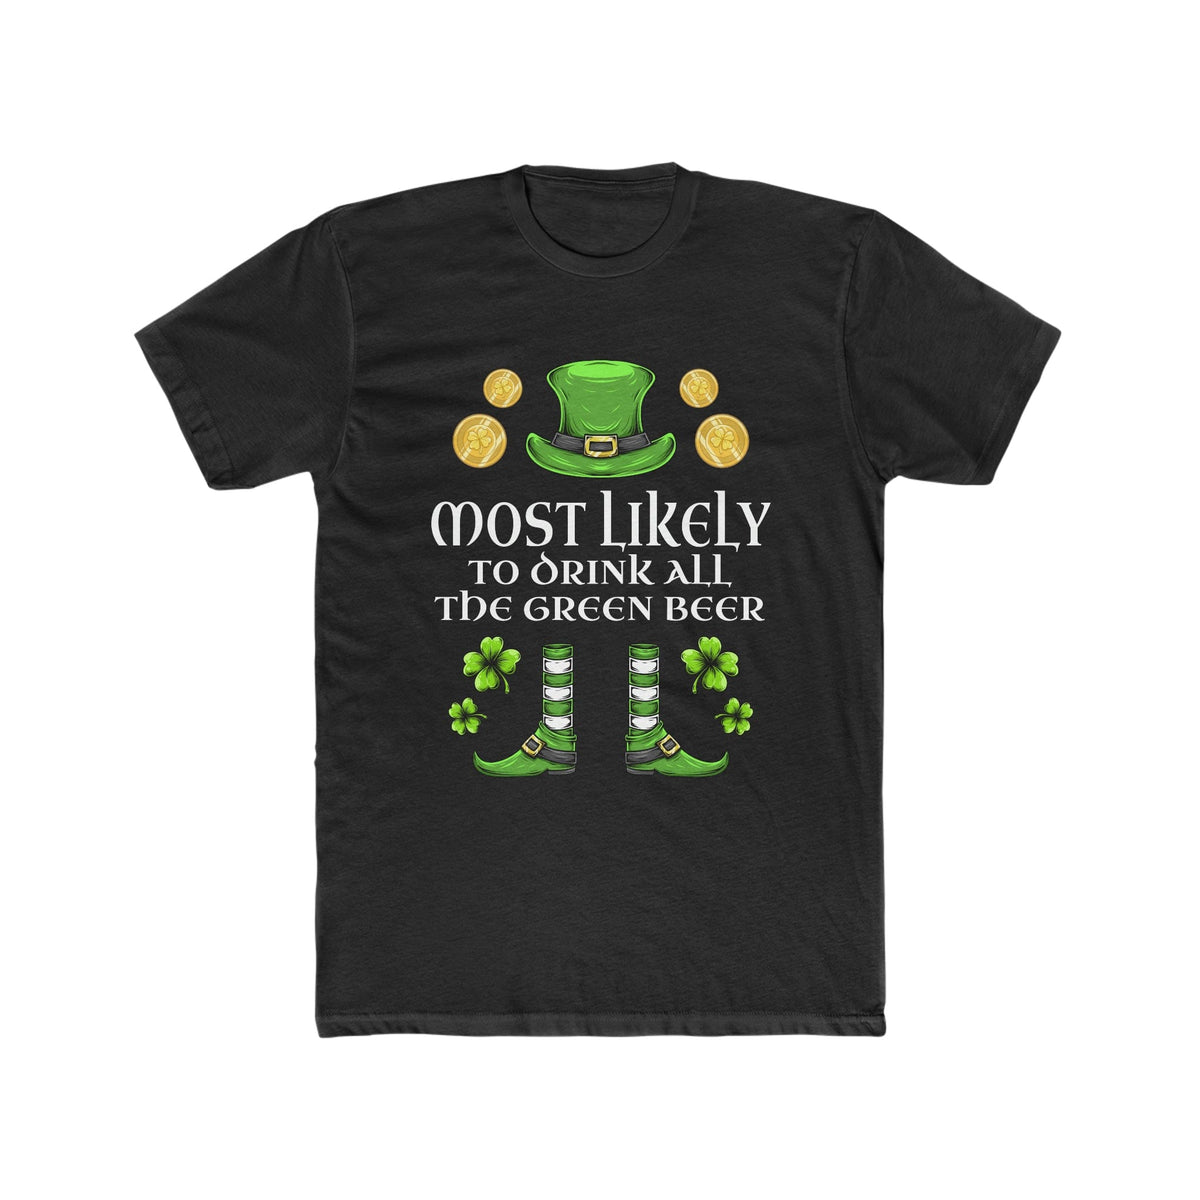 Most likely TO DRINK ALL THE GREEN BEER Premium Unisex Shirt